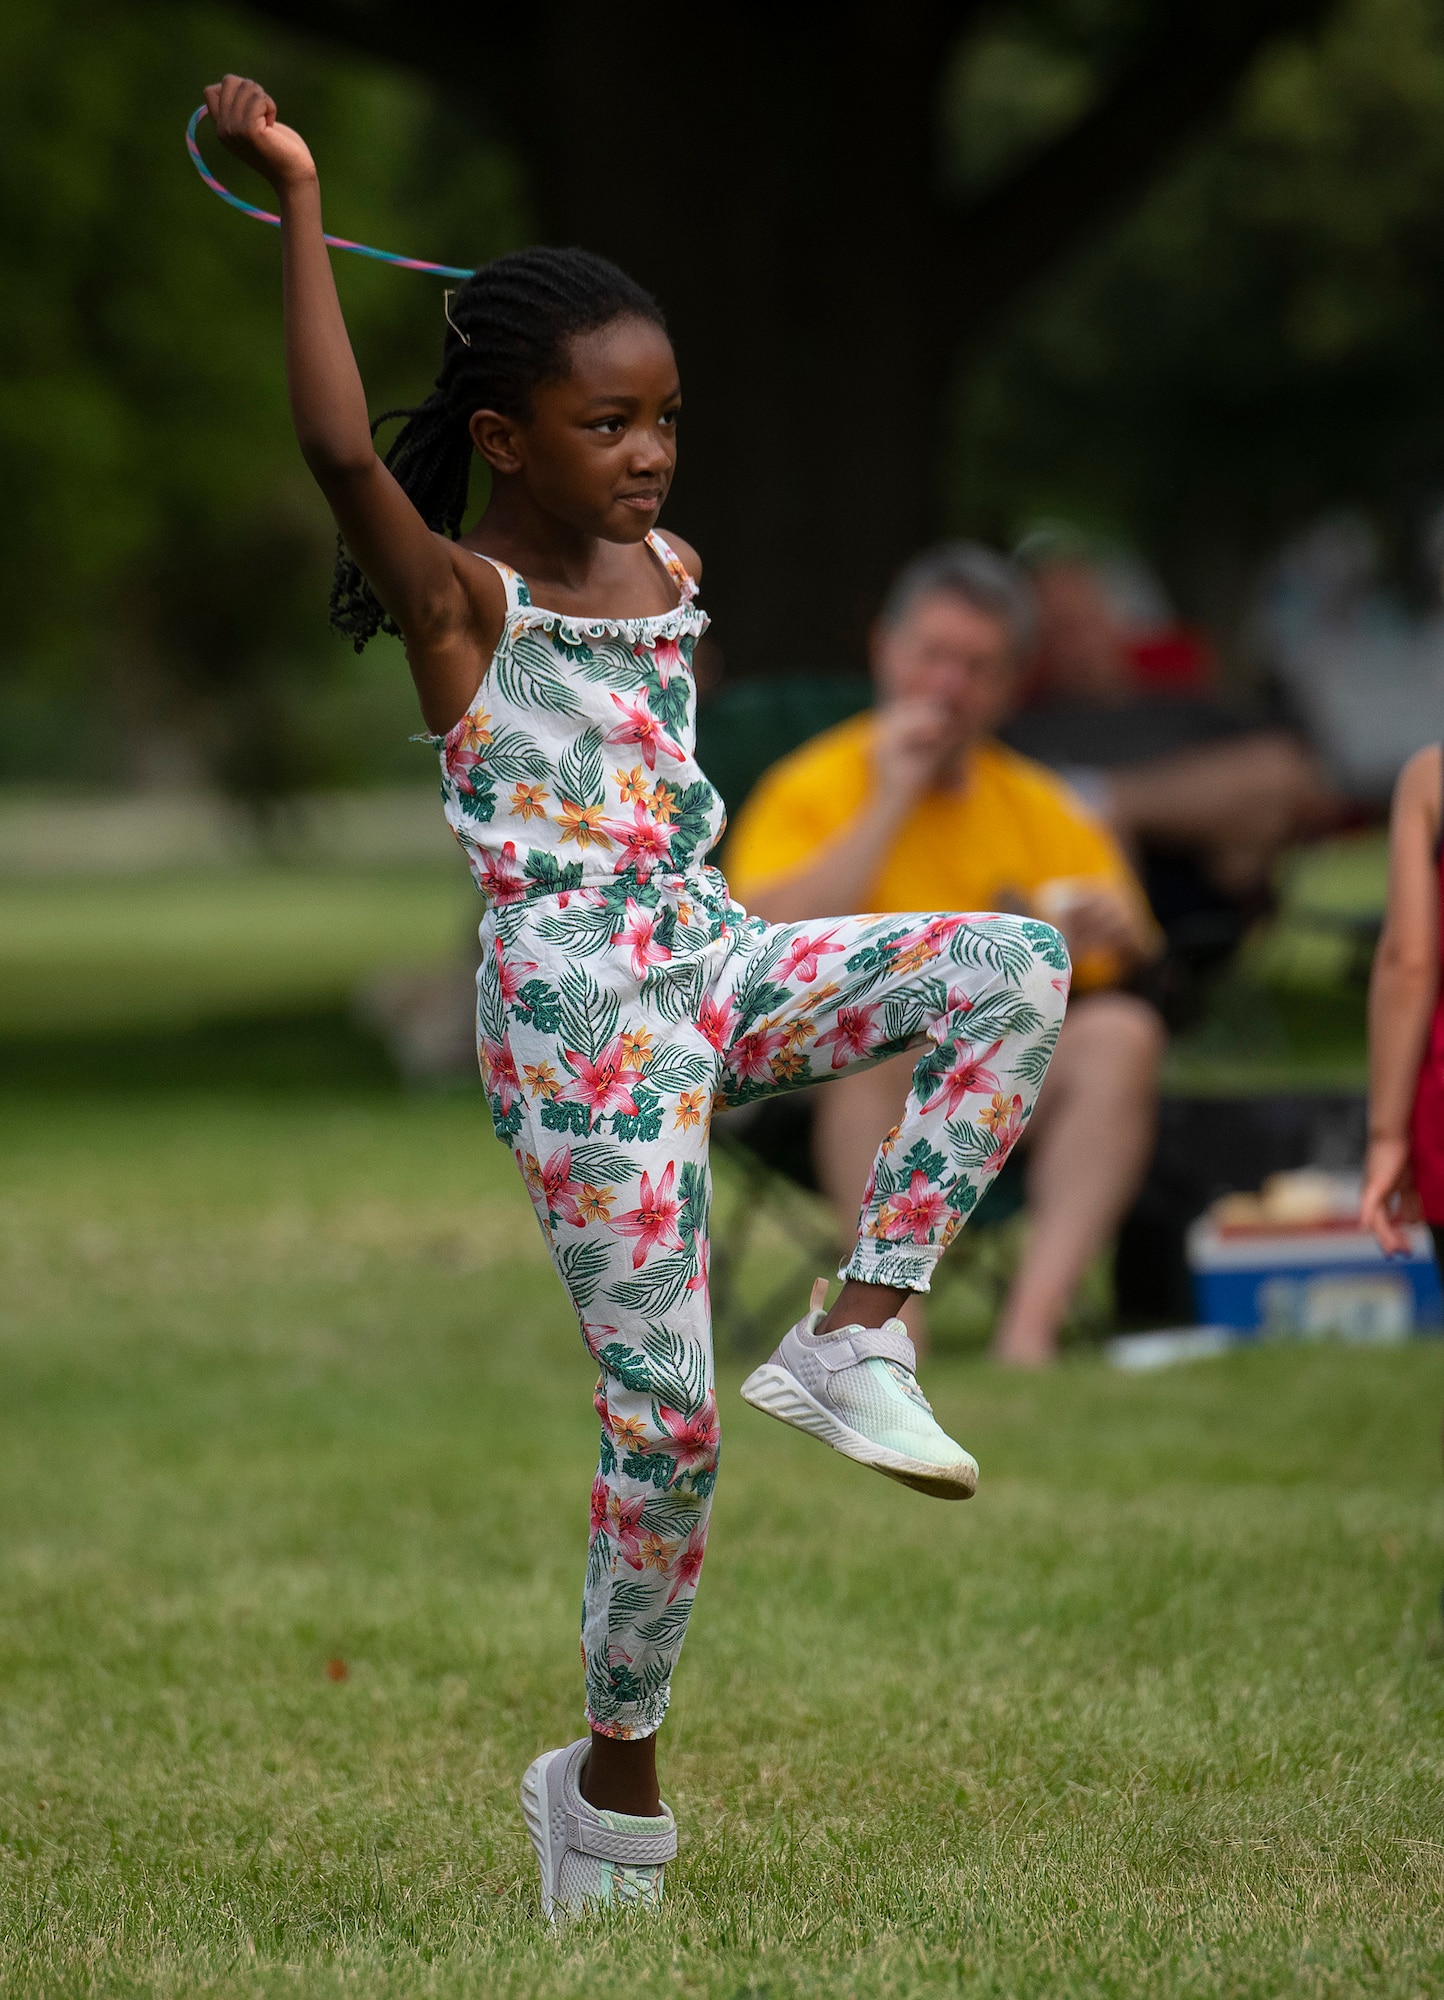 Natalia Jones, 8, the daughter of Maj. Leamon and Vicentia Jones, dances to the music June 24, 2021, at a block party sponsored by the 88th Force Support Squadron in the brick quarters historic district at Wright-Patterson Air Force Base, Ohio. The event featured music, games, food and sponsor booths and gave the Wright-Patt community an opportunity to get out and socialize. (U.S. Air Force photo by R.J. Oriez)